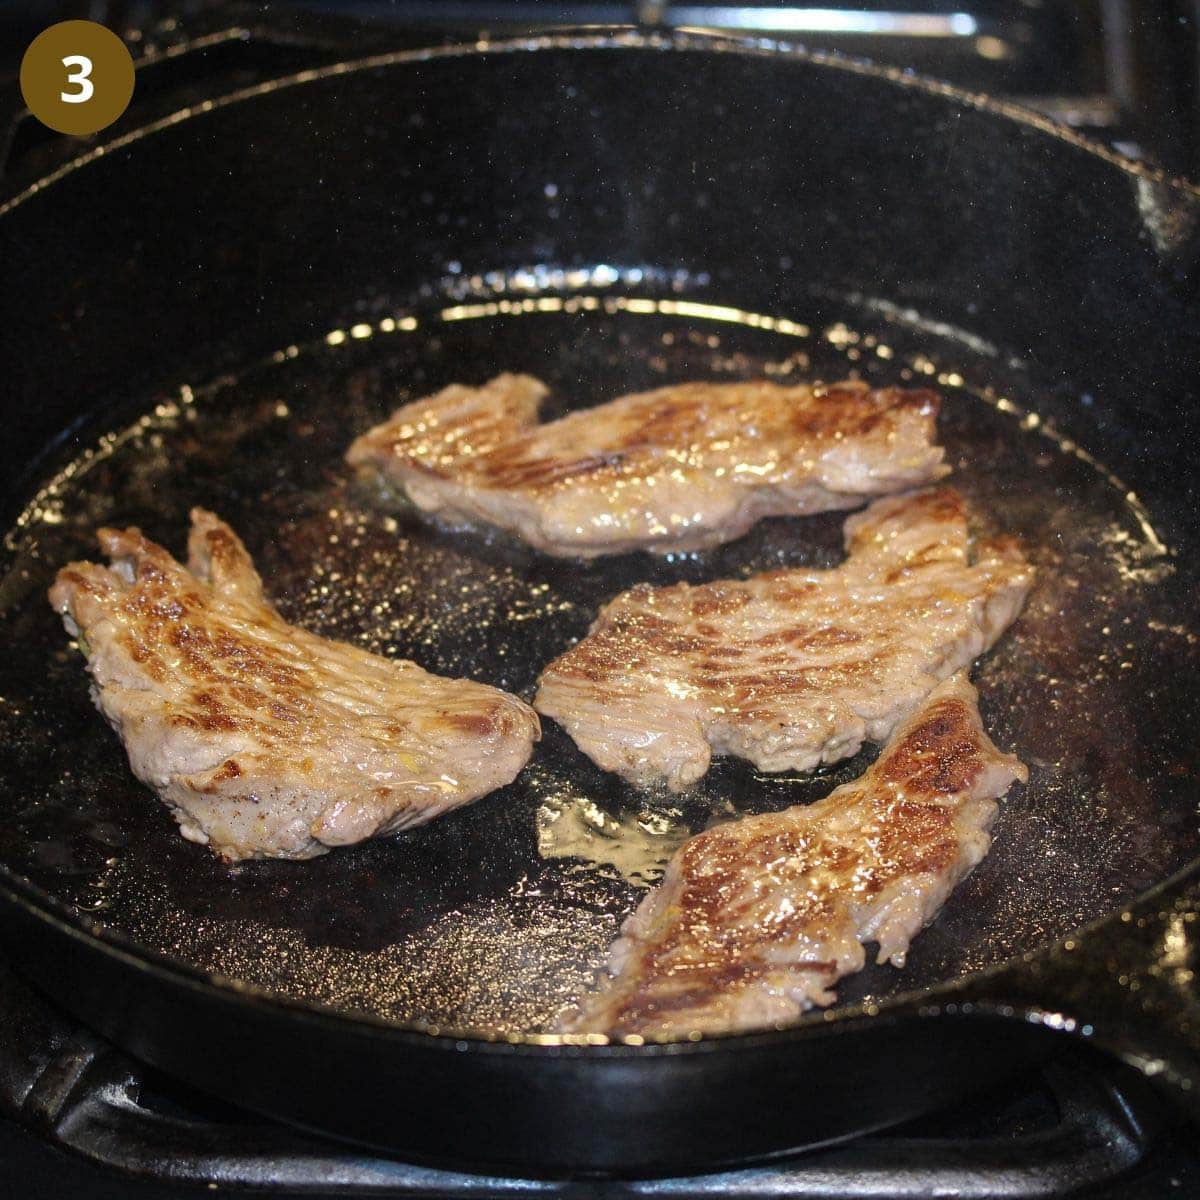 frying small pieces of veal in a cast-iron skillet.